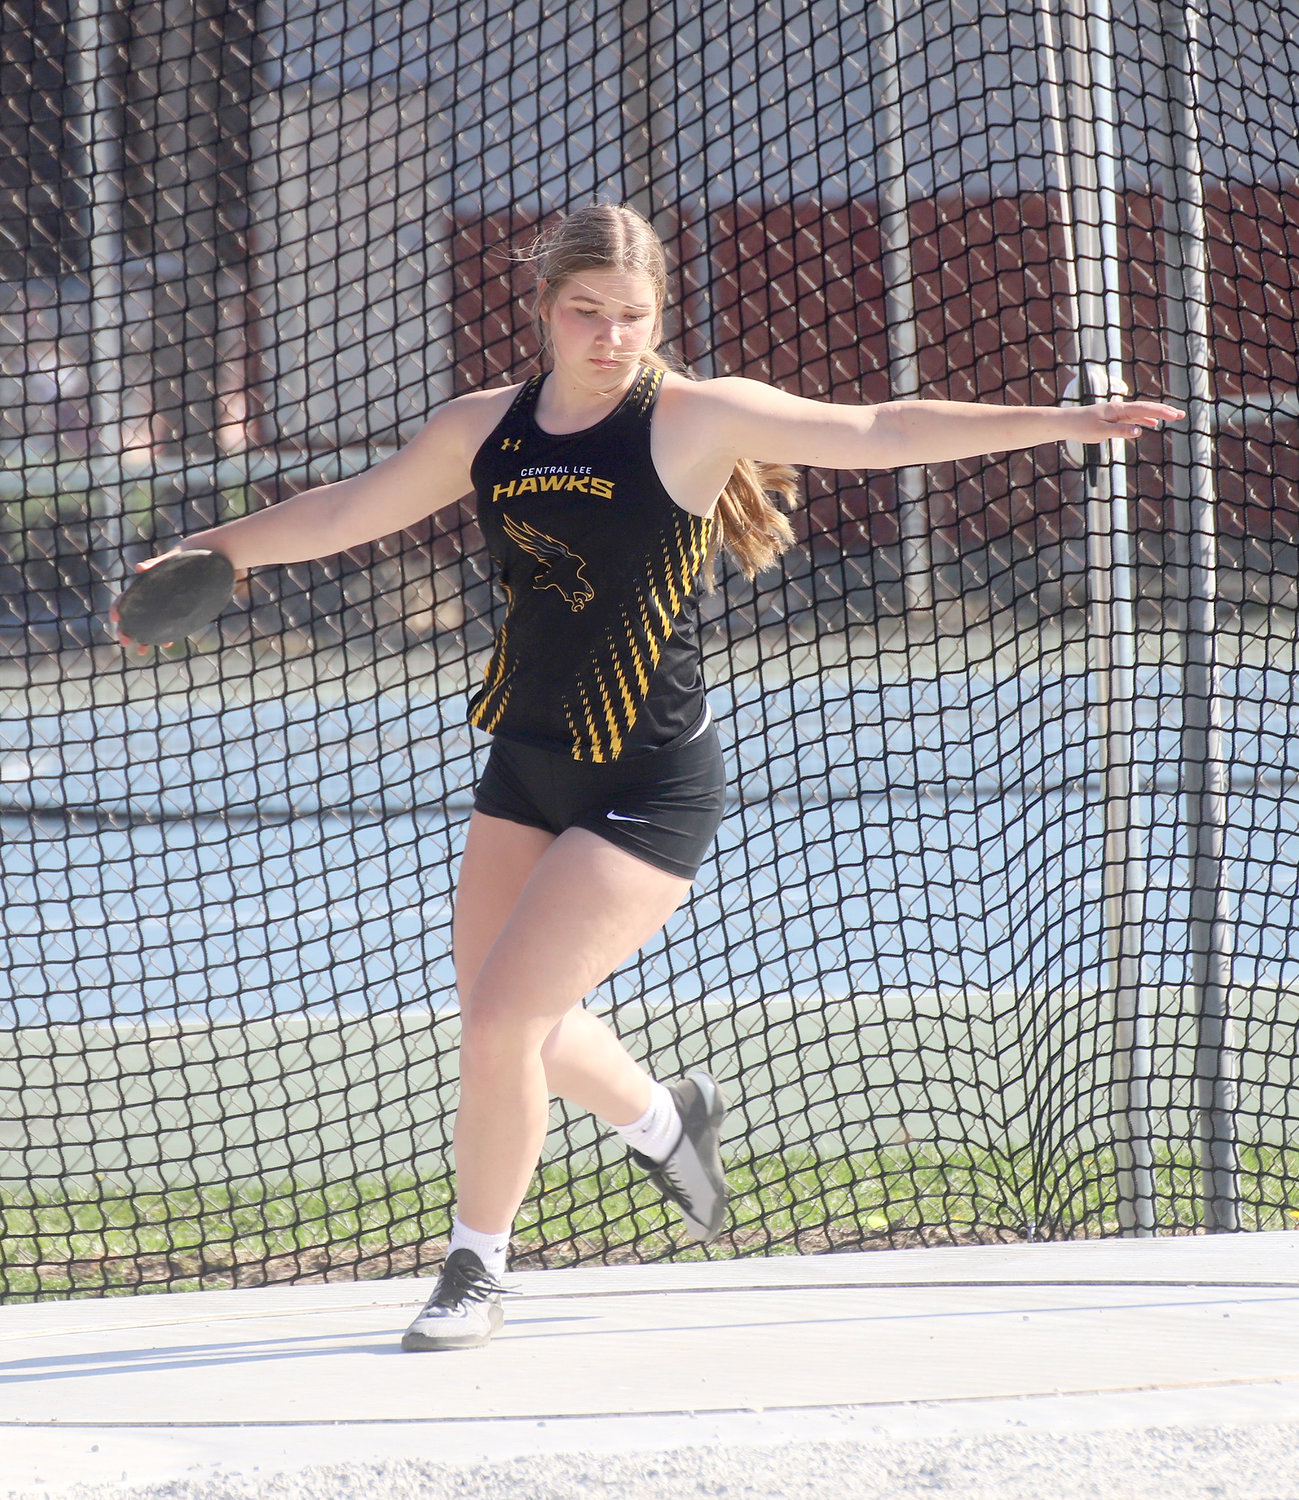 The Lady Hawks' Aubrey Weber winds up in the discus at Fort Madison High School Tuesday at the Timm Lamb Pen City Relays.